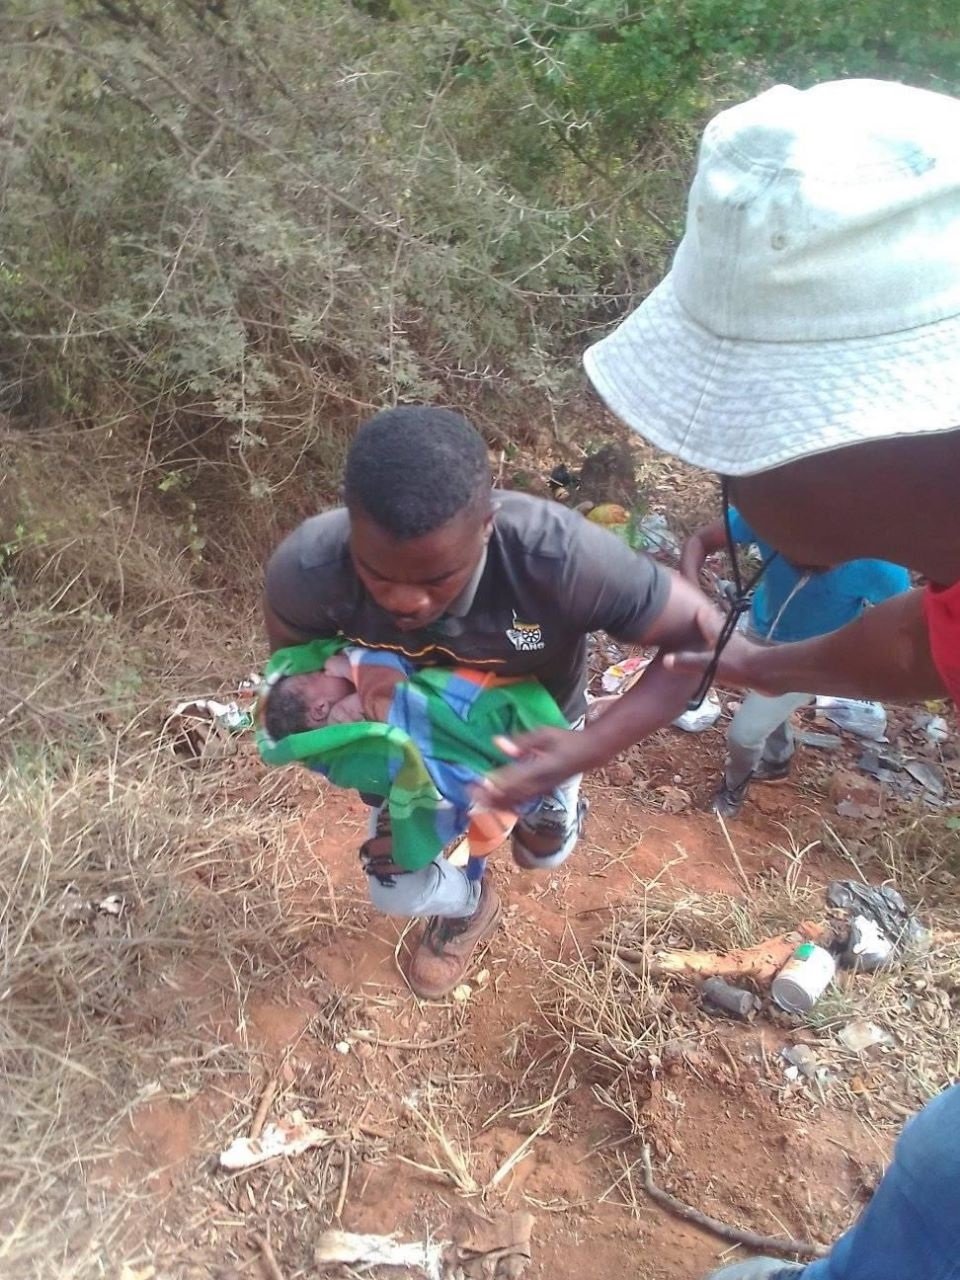 Resident Eddie Malatji with a newborn baby found dumped at a dumping site.